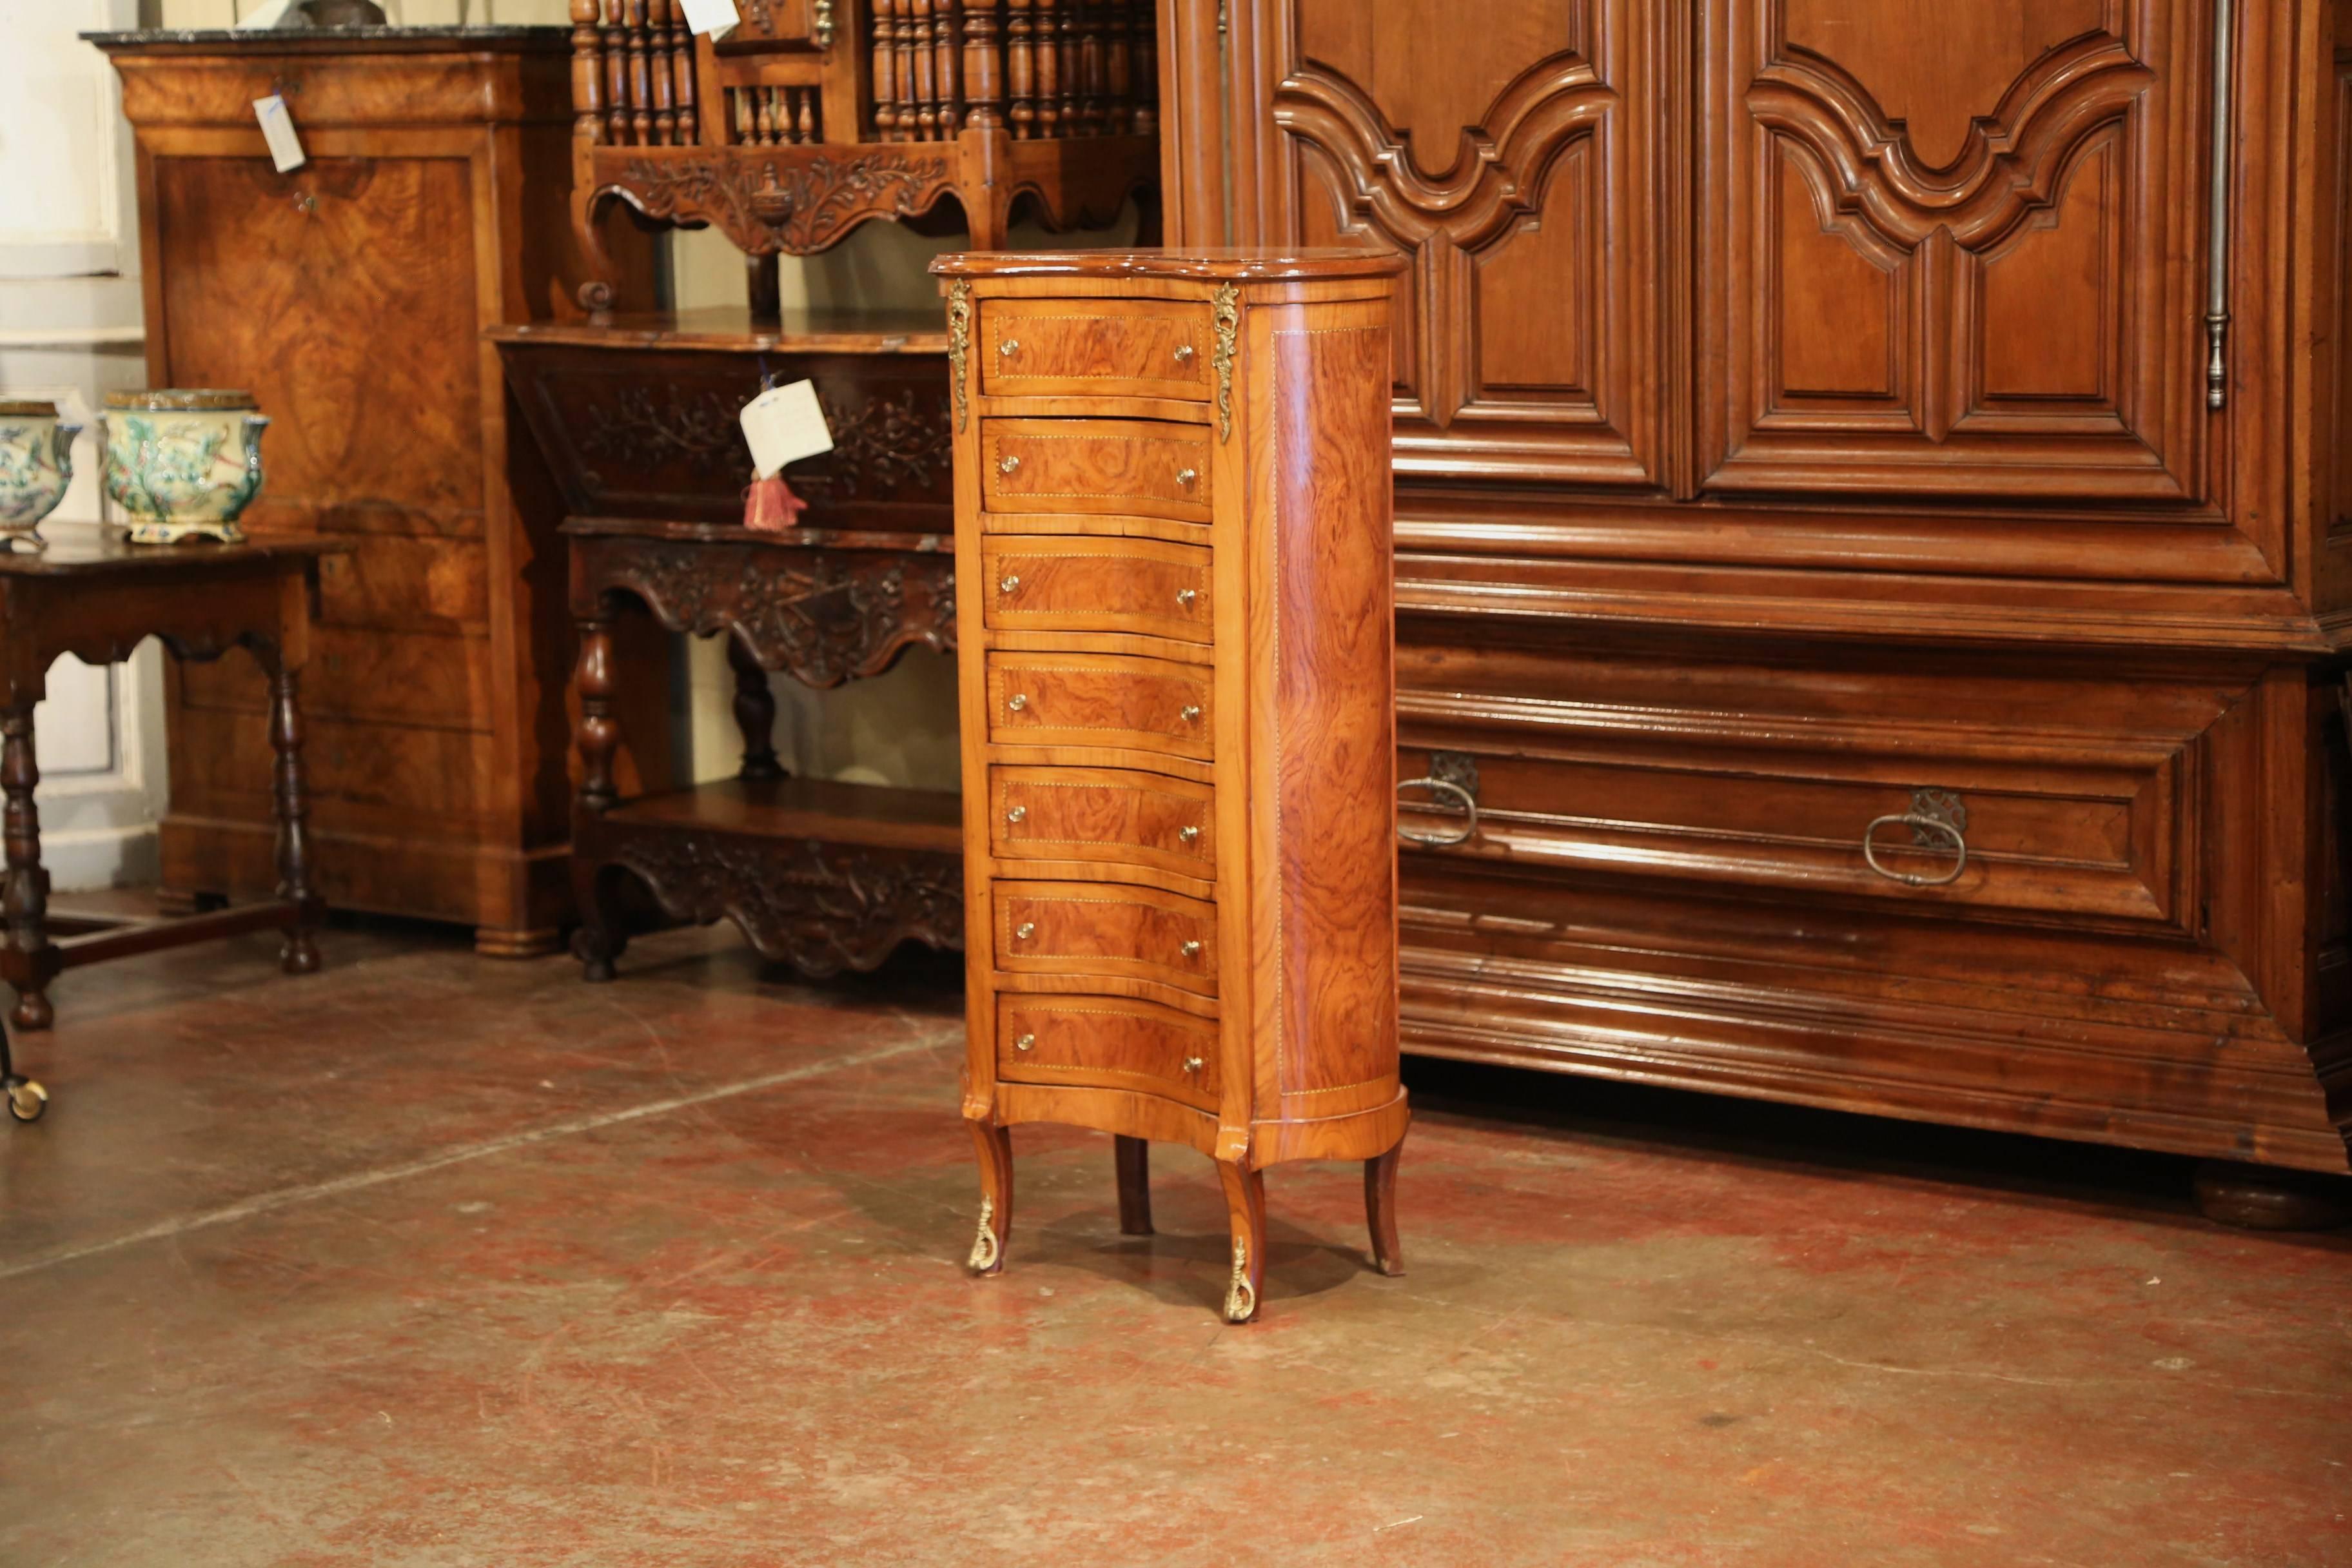 Place this tall multi-drawer cabinet in your bedroom or bathroom for extra storage. Crafted in France, circa 1920 and shaped as a kidney, the fruit wood 